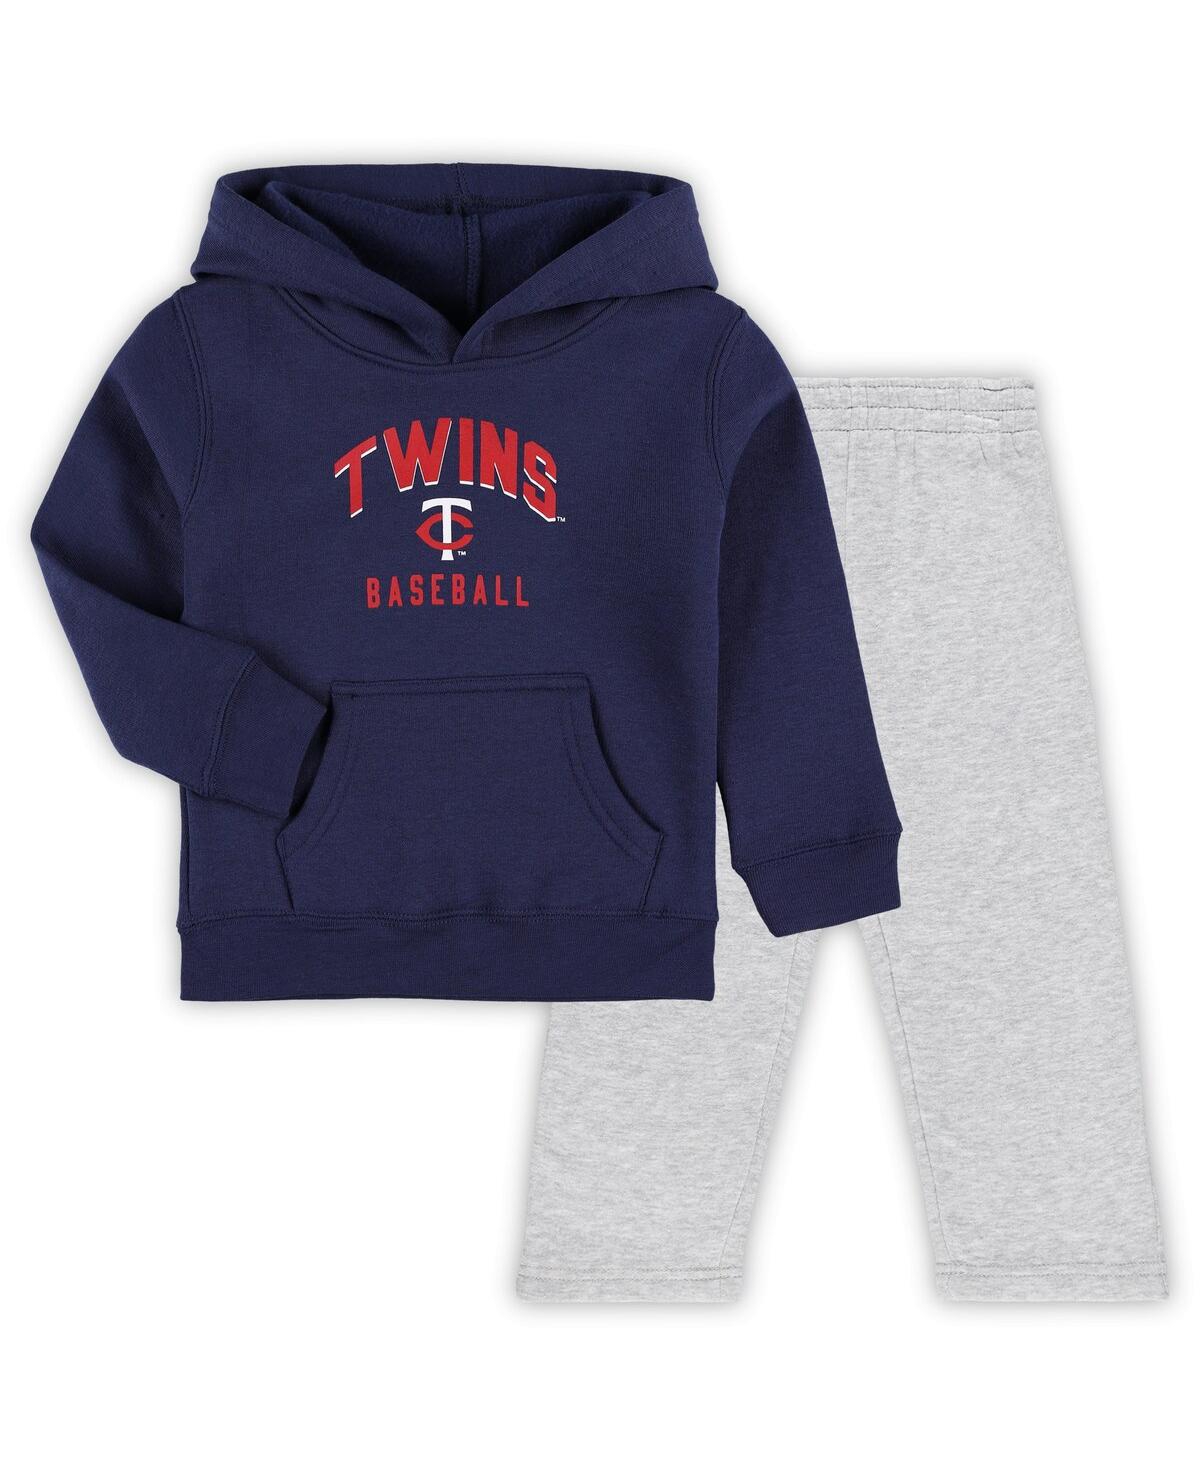 Outerstuff Babies' Toddler Boys And Girls Navy, Gray Minnesota Twins Play-by-play Pullover Fleece Hoodie And Pants Set In Navy,gray